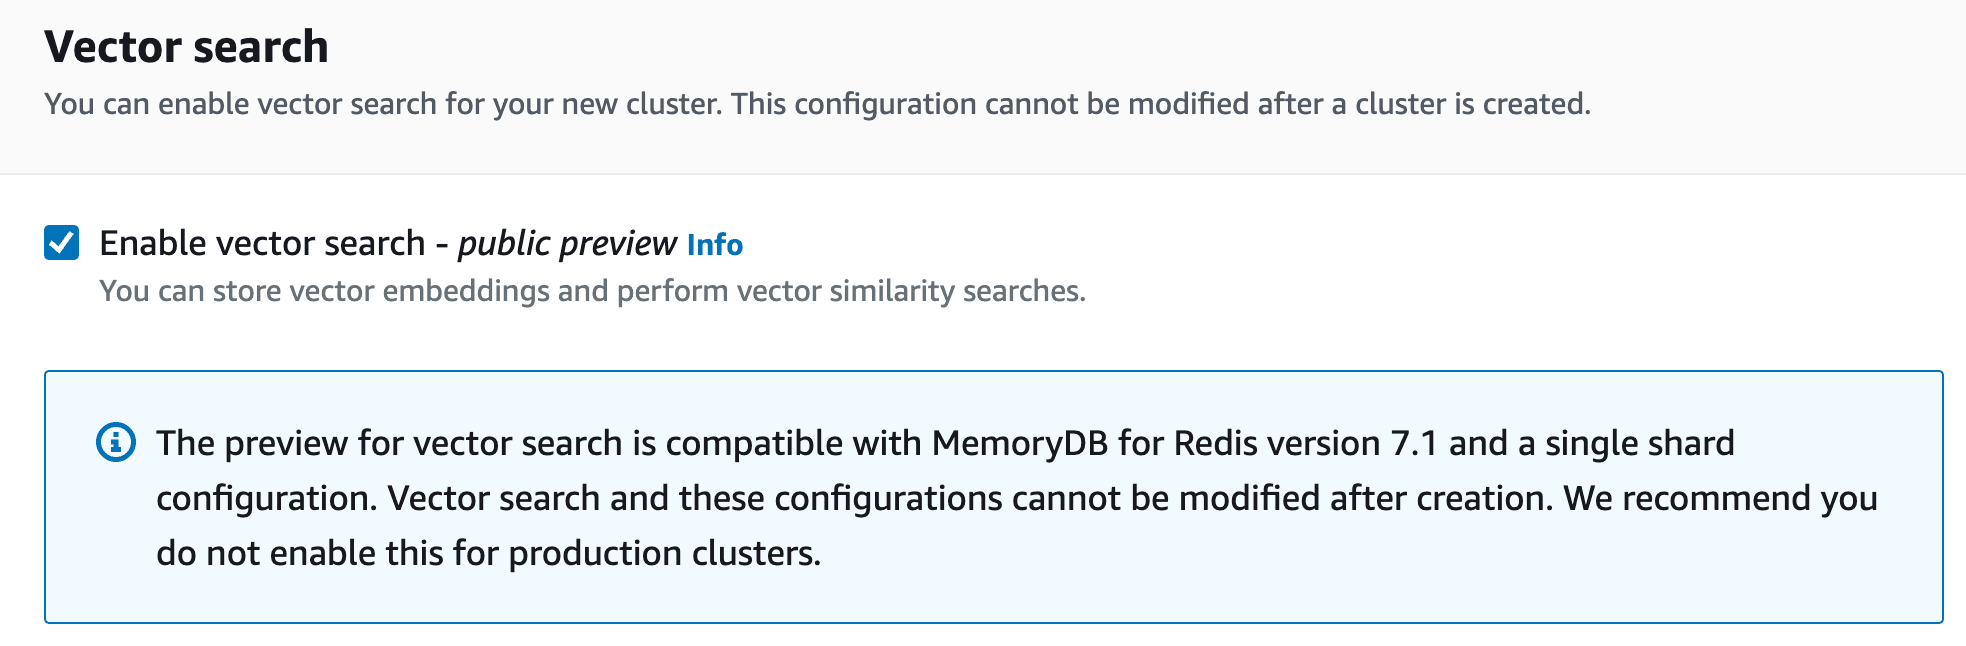 Vector search for Amazon MemoryDB for Redis